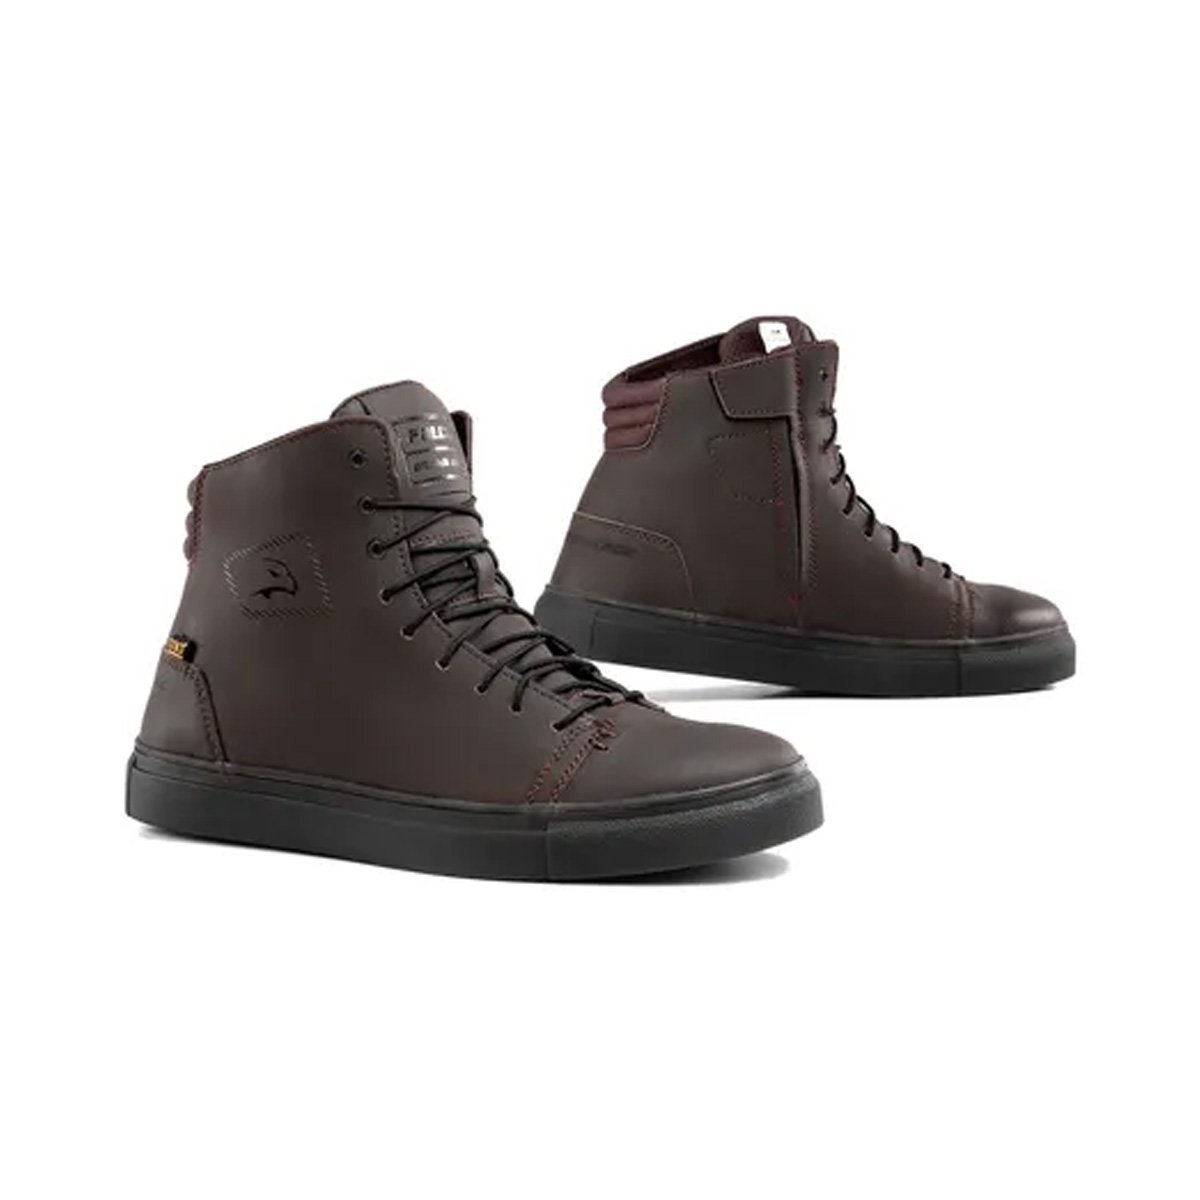 Image of Falco Nomad 2 Brown Size 39 ID 8052675494822